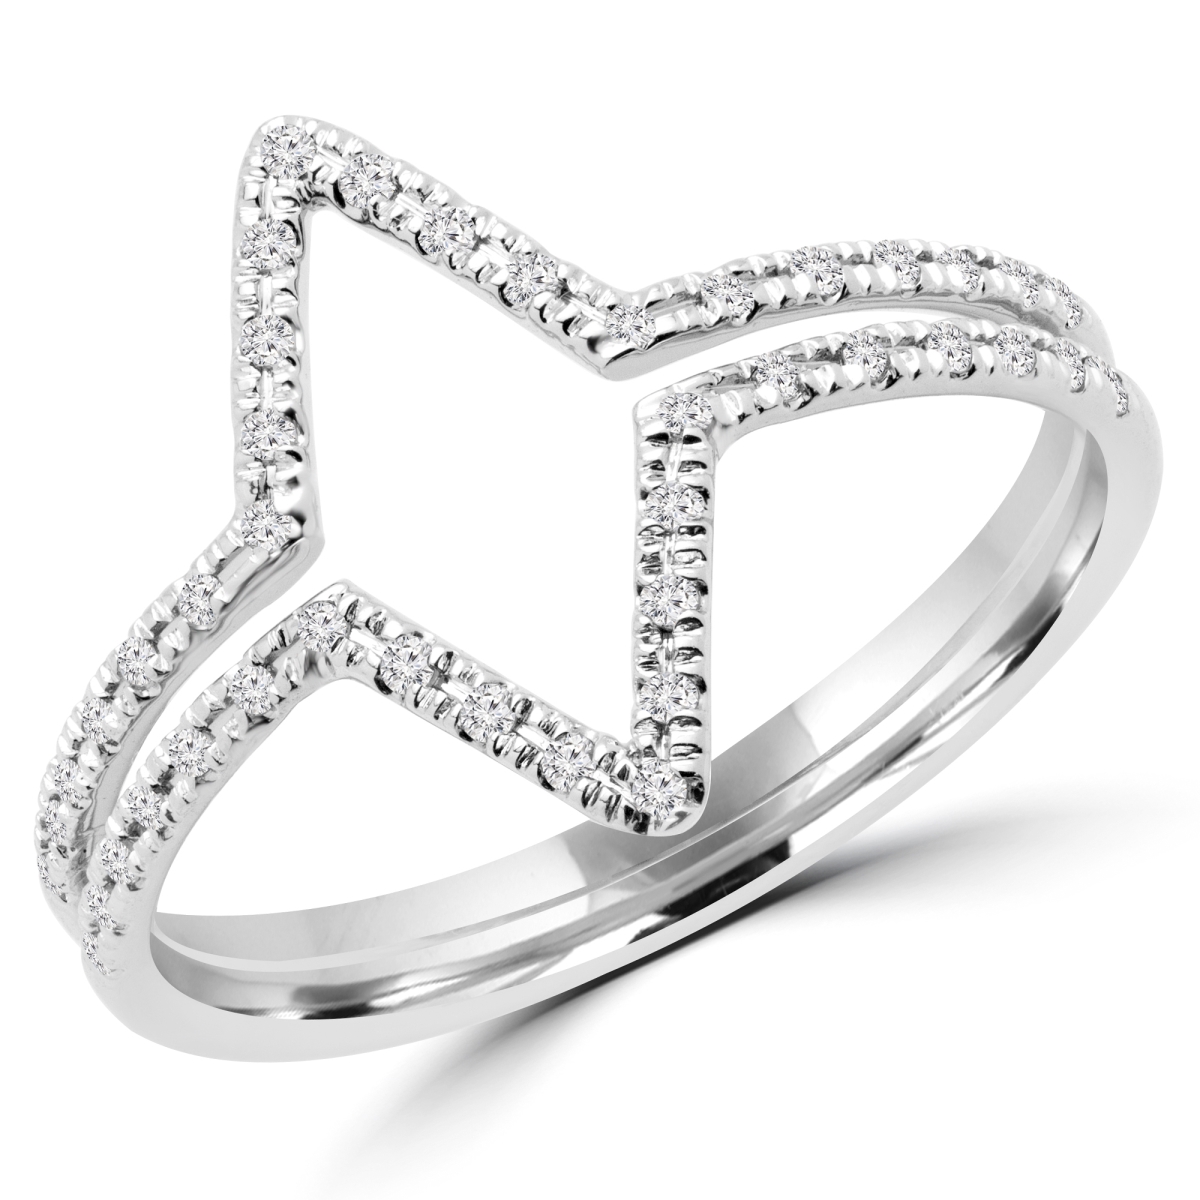 Picture of Majesty Diamonds MDR170058-P 0.13 CTW Round Diamond Cocktail Ring in 14K White Gold